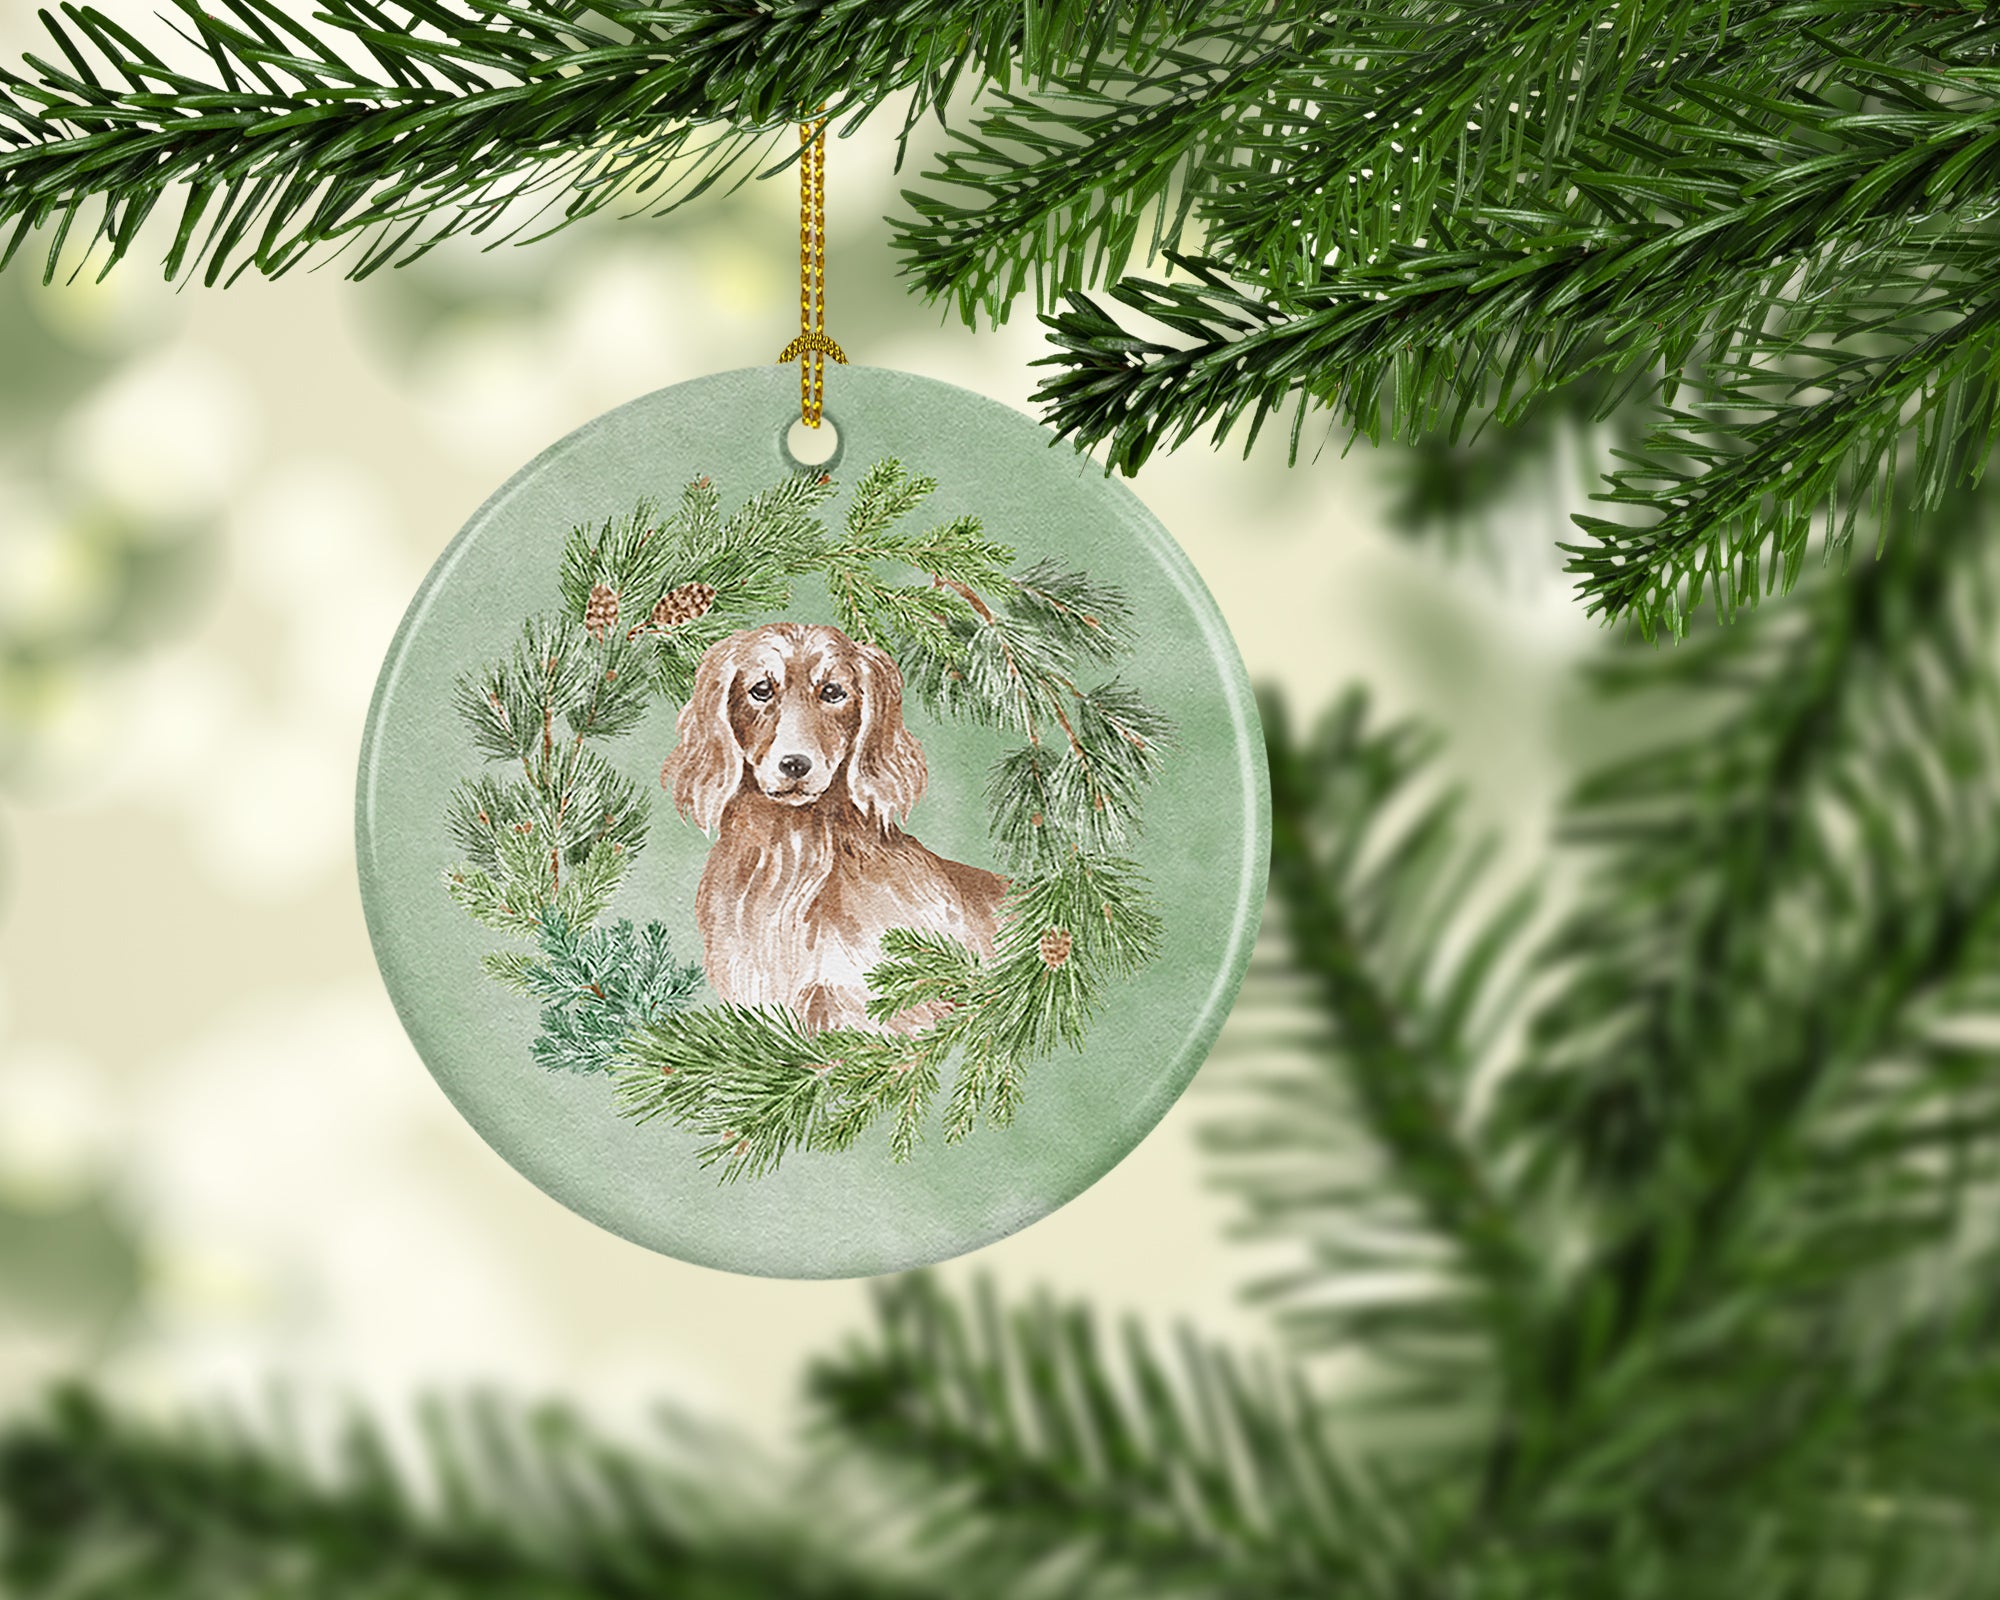 Buy this Dachshund Red Longhaired Christmas Wreath Ceramic Ornament